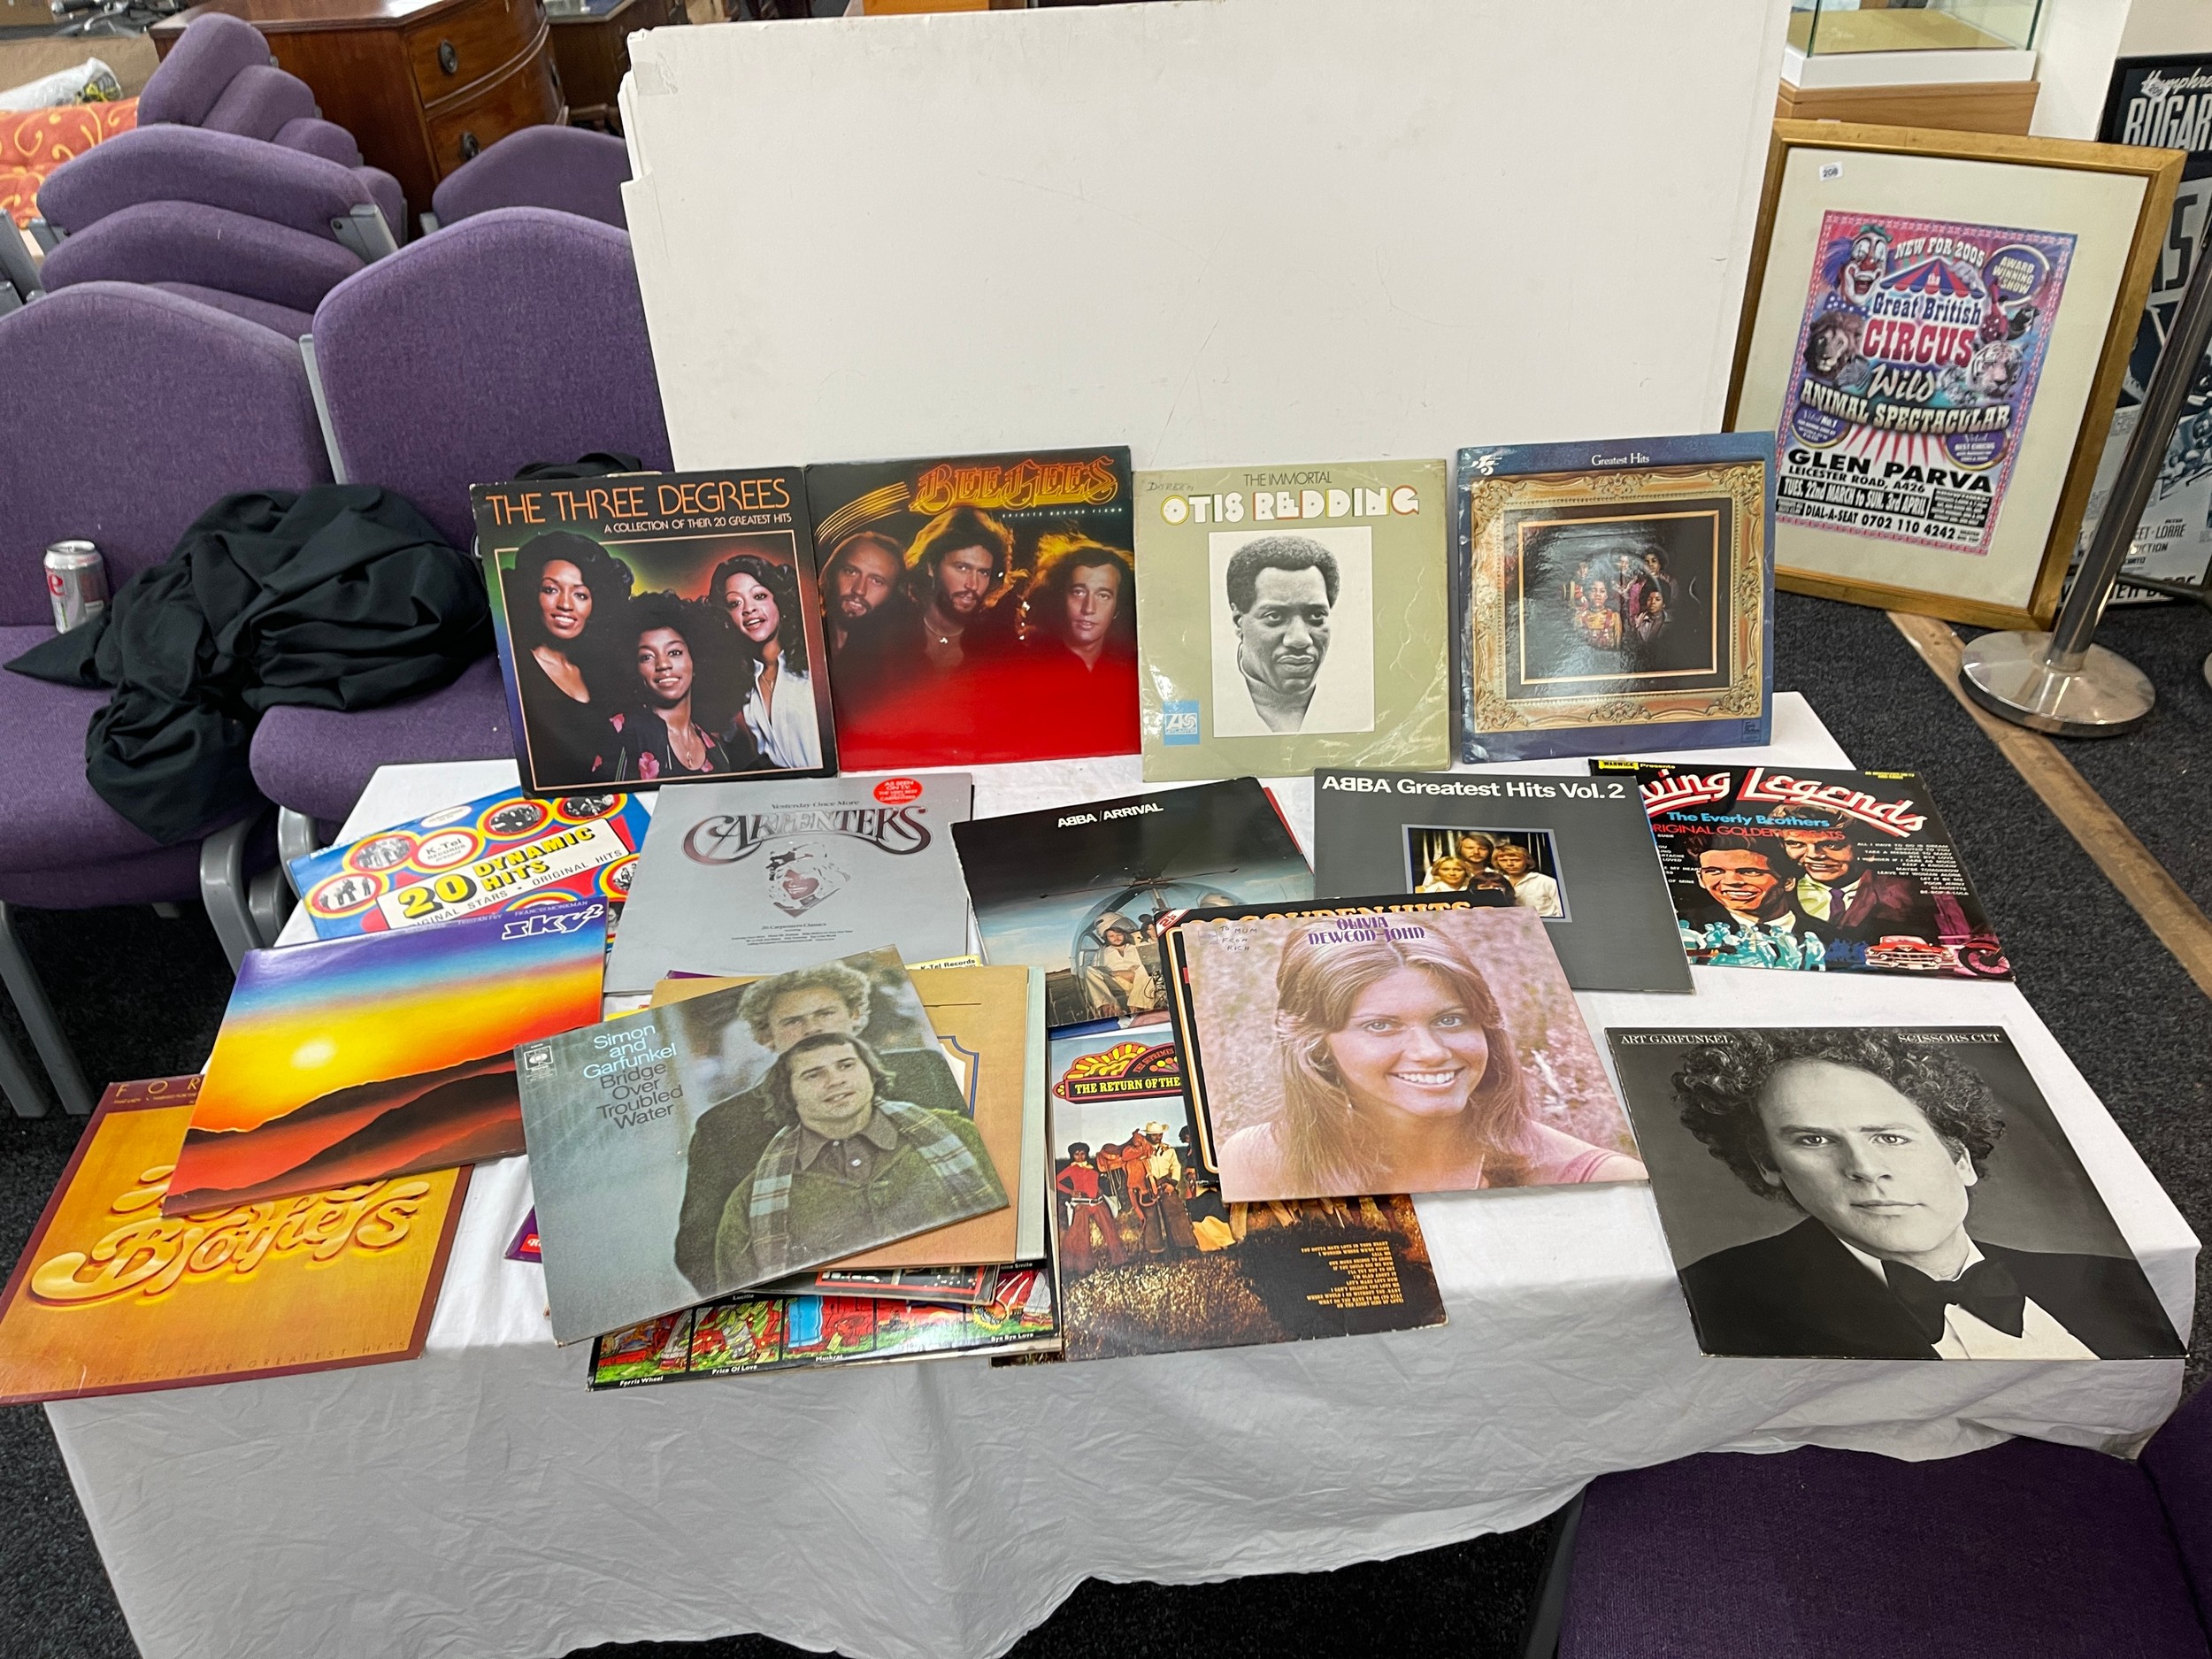 Selection of records includes Bee gees, otis rodding, living legends, abba etc